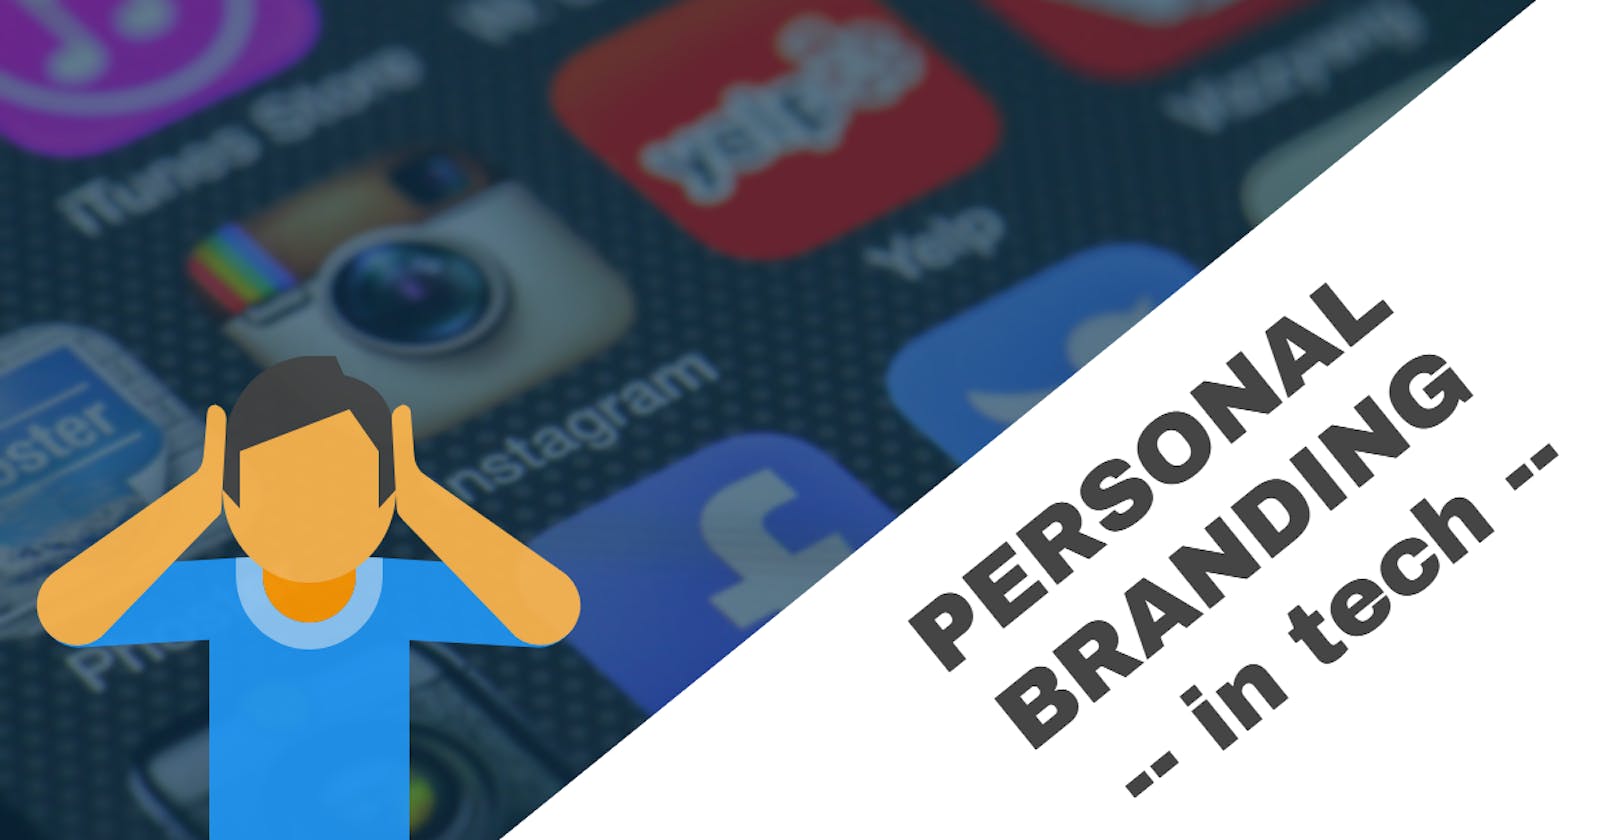 Personal Branding in Tech is the New Normal